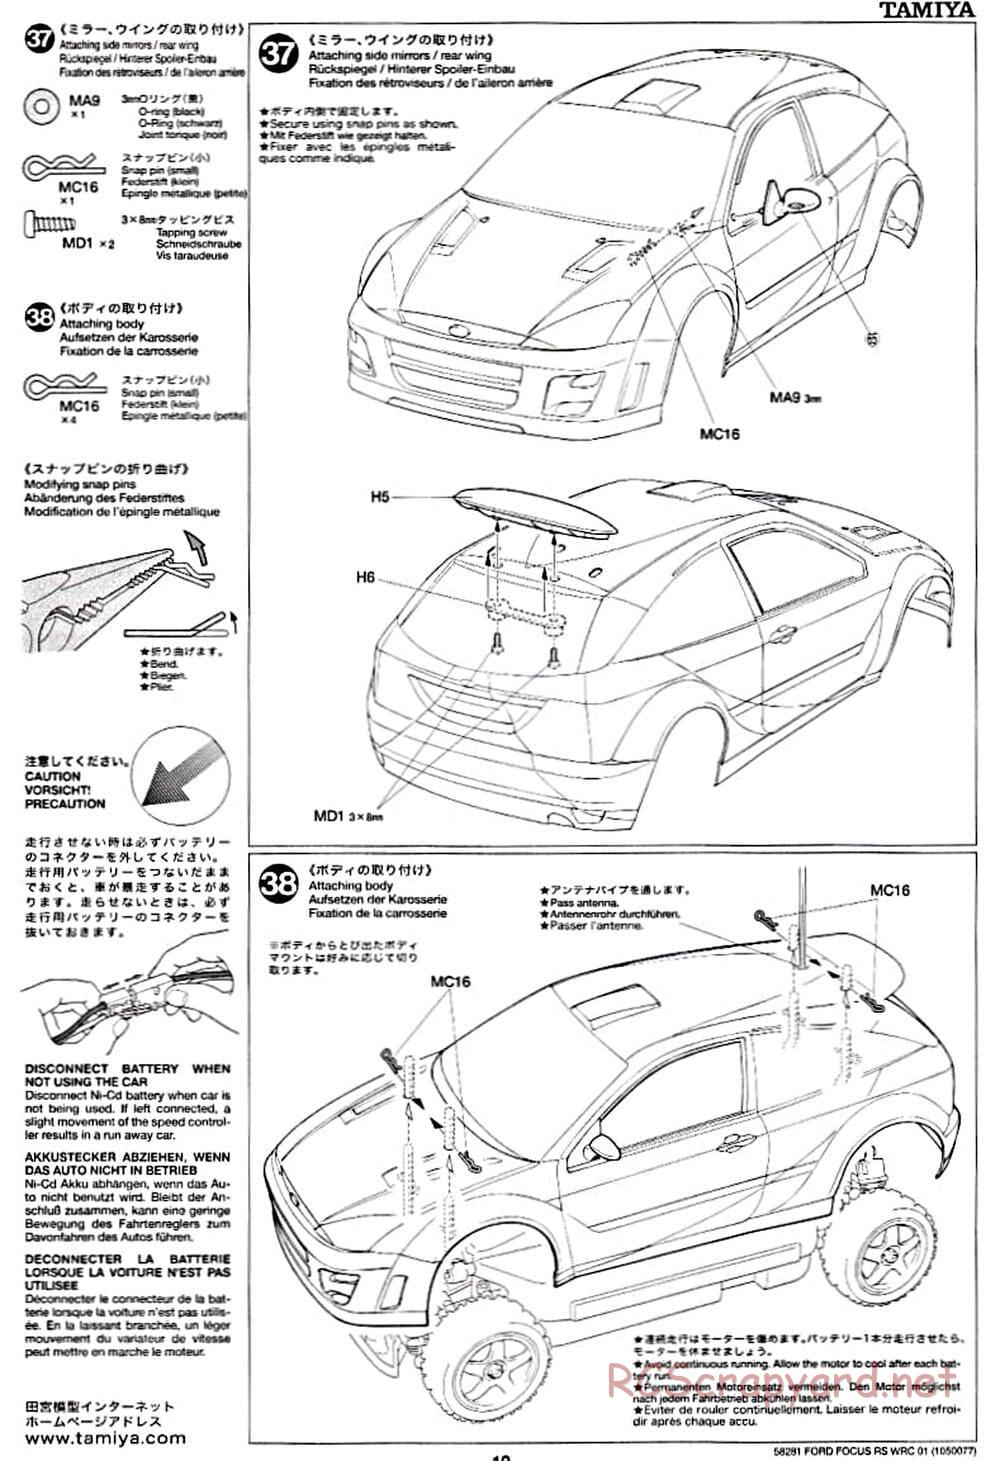 Tamiya - Ford Focus RS WRC 01 - TB-01 Chassis - Manual - Page 19